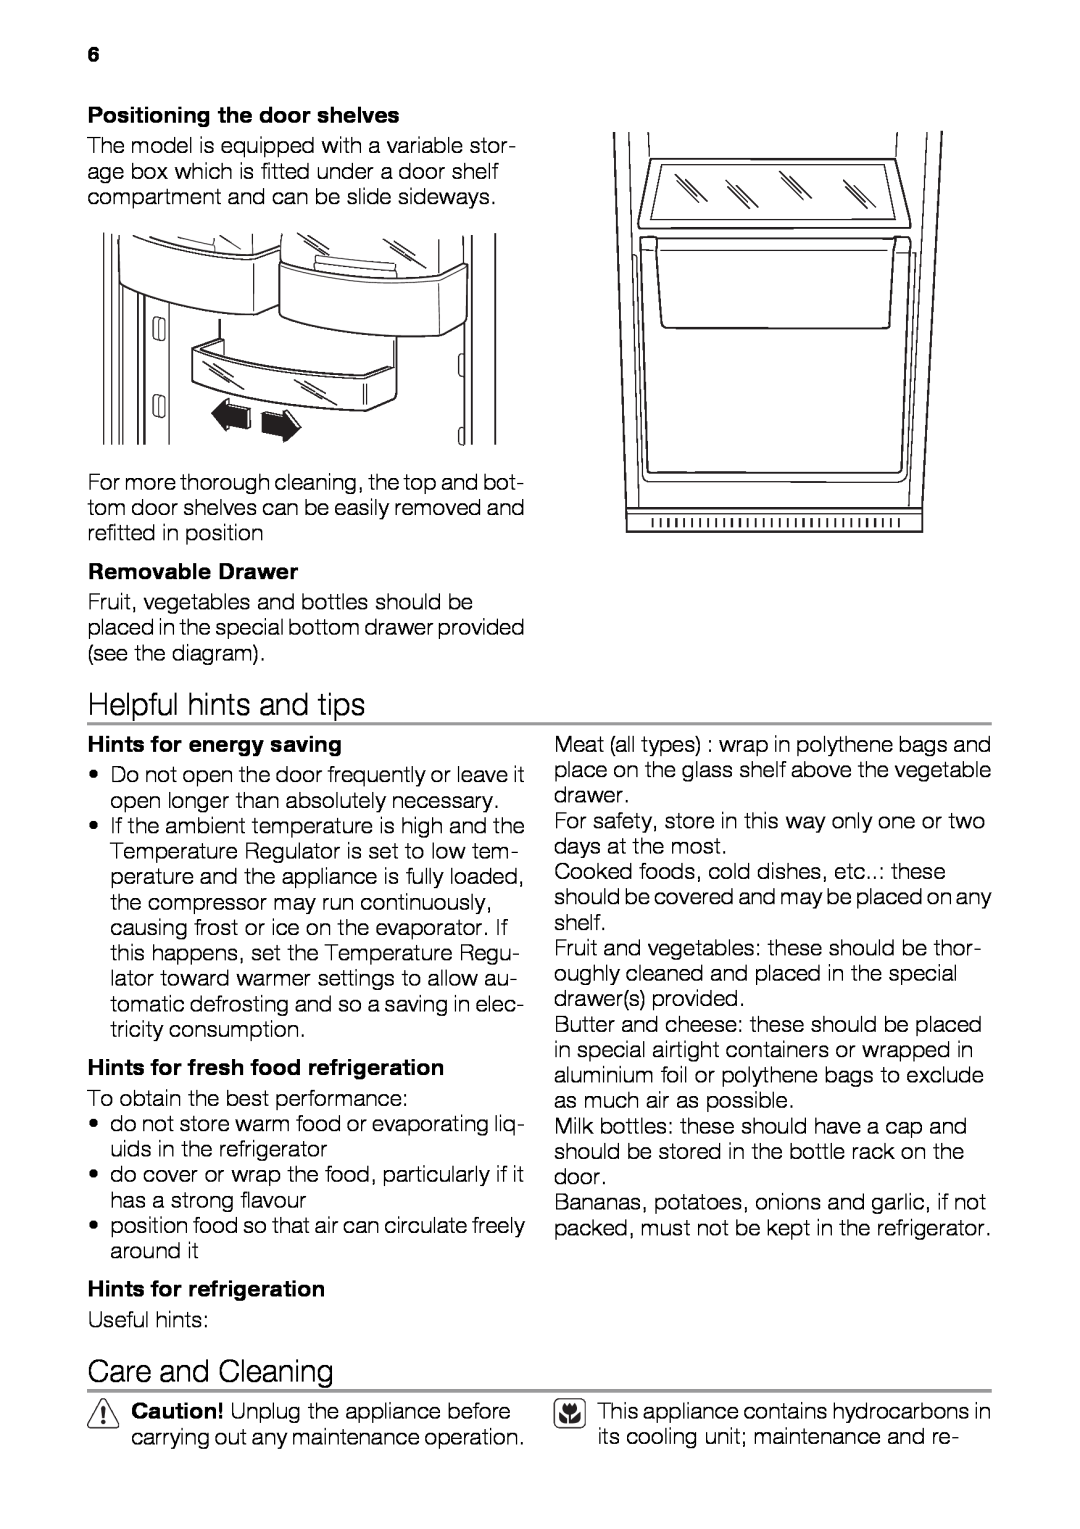 Kuppersbusch USA IKE339-1 Helpful hints and tips, Care and Cleaning, Positioning the door shelves, Removable Drawer 